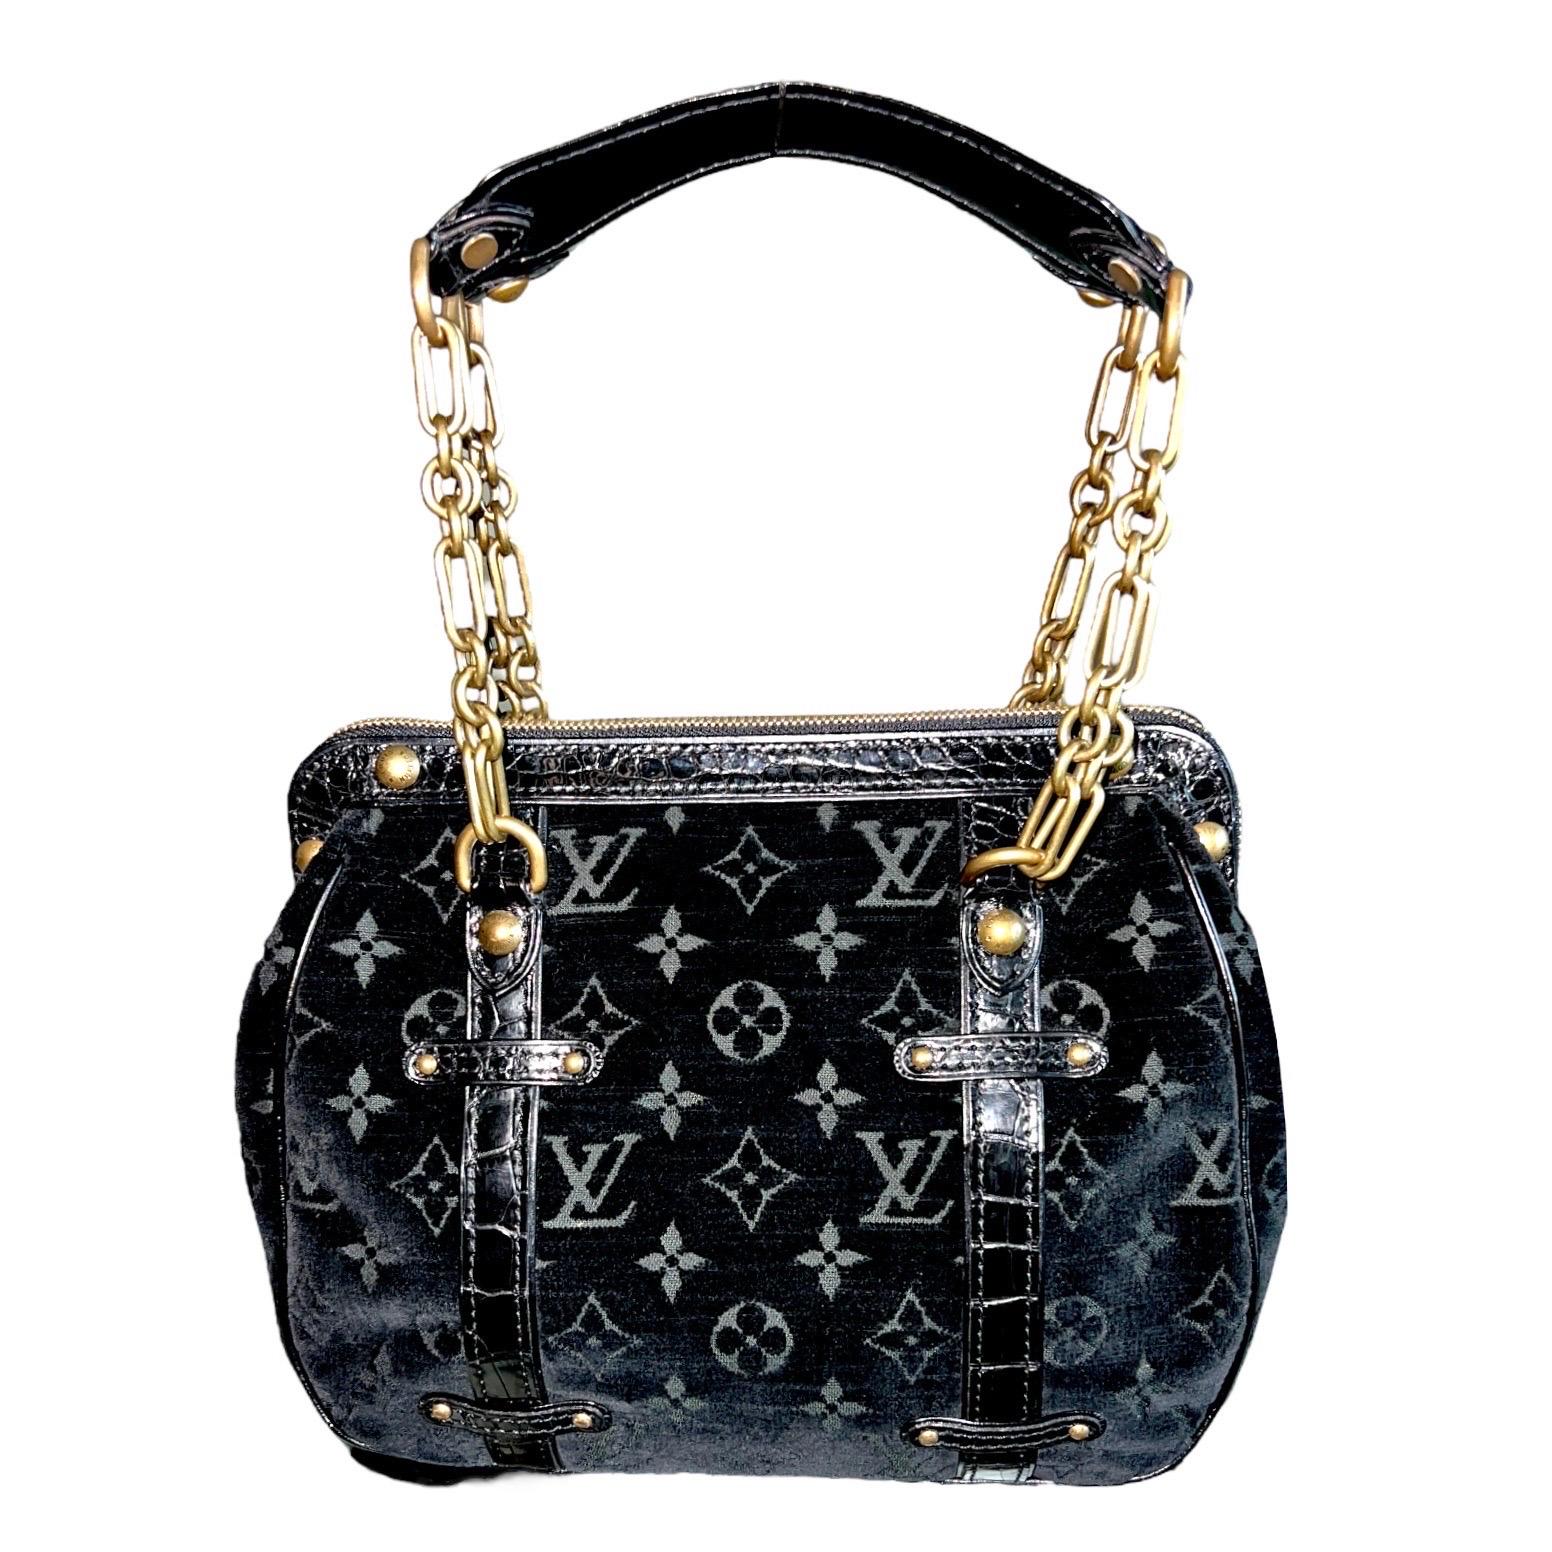 Extremely Rare Louis Vuitton Alligator Handbag
Produced Only For Selected Clients On Invitation Only 


Details:

A Louis Vuitton signature piece that will last you for many years, from one of Vuitton's most stunning collections designed by Marc